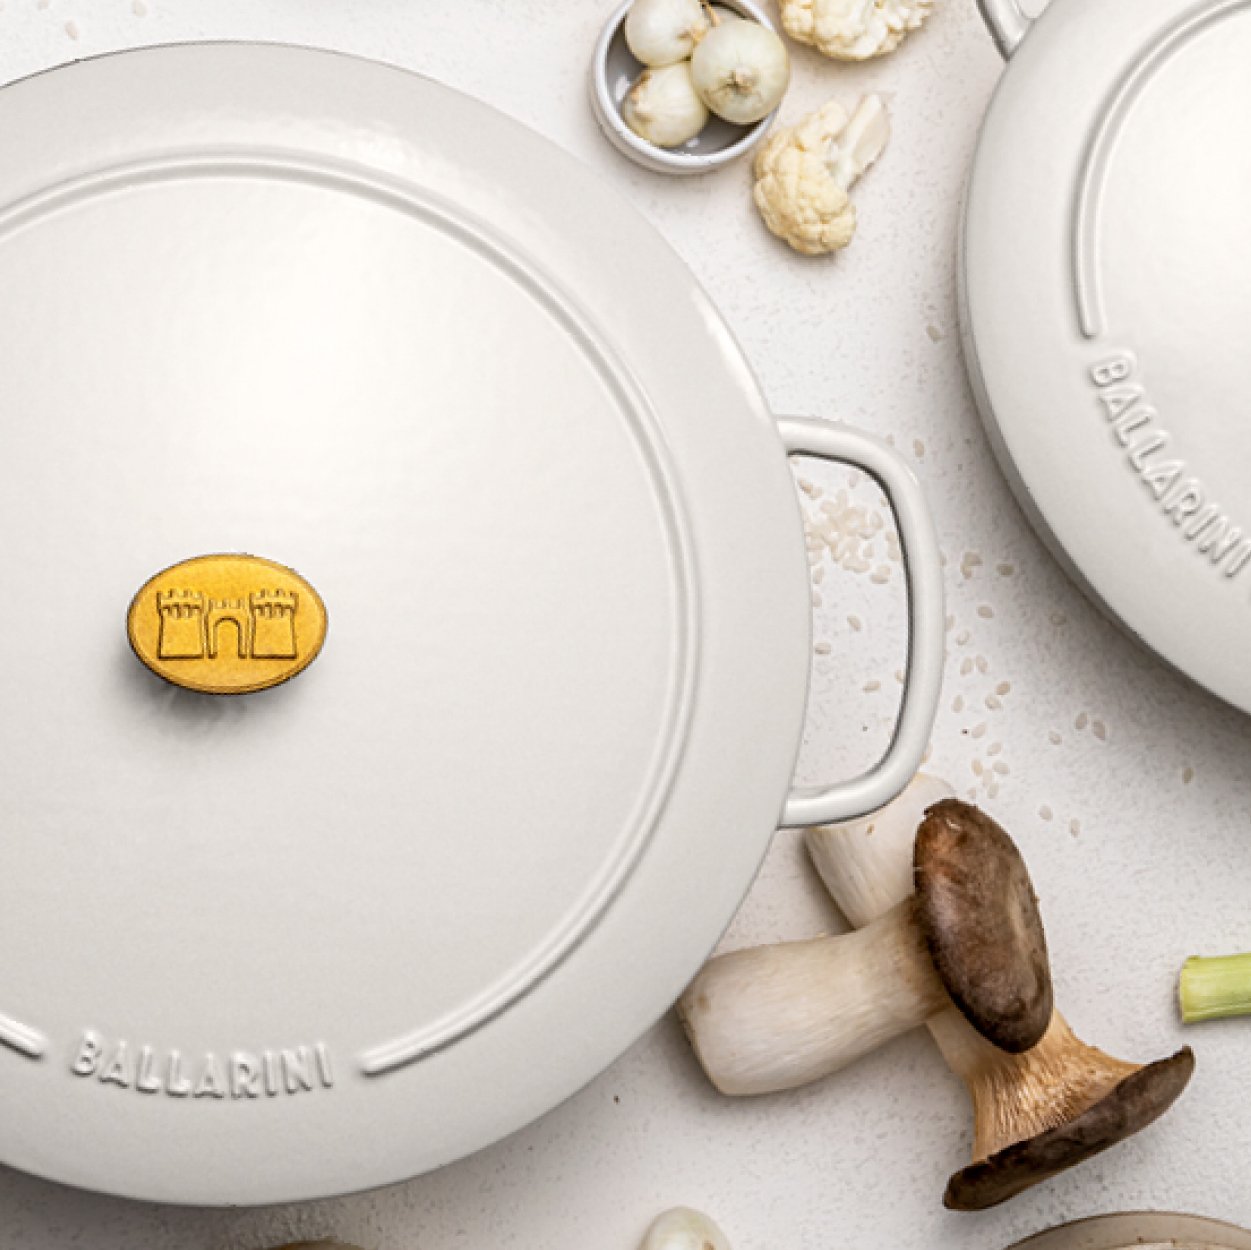 https://www.zwilling.com/on/demandware.static/-/Sites-zwilling-us-Library/default/dwfe6b95b3/images/product-content/masonry-content/ballarini/cookware/bellamonte/BA_Bellamonte_Mason_Comp_600-600_BellamonteMasonry_4.jpg